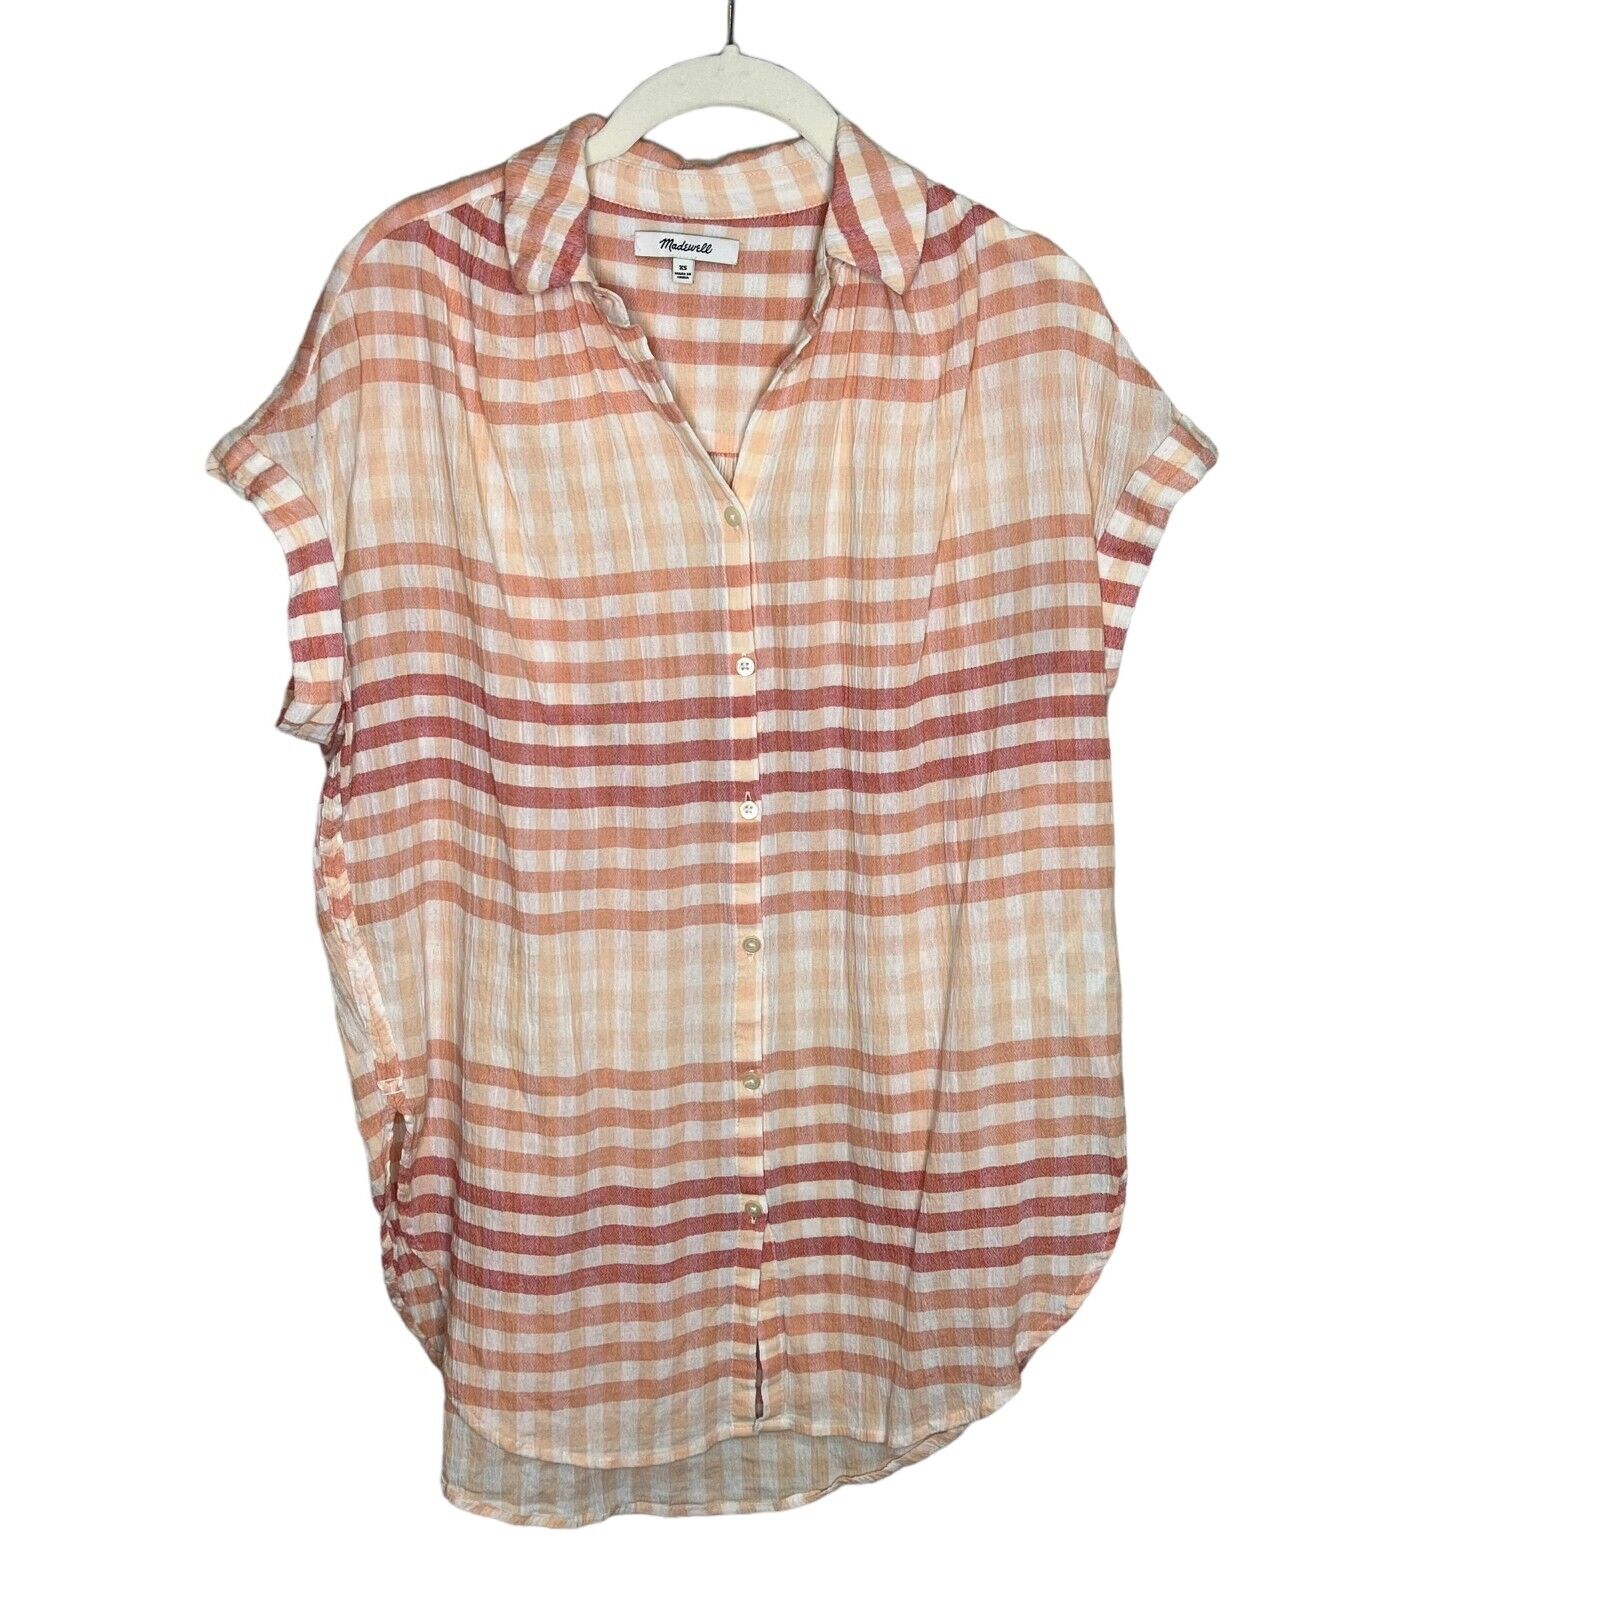 Madewell Central Tunic Shirt Ombré Gingham Button Front Gauze Top Size XS